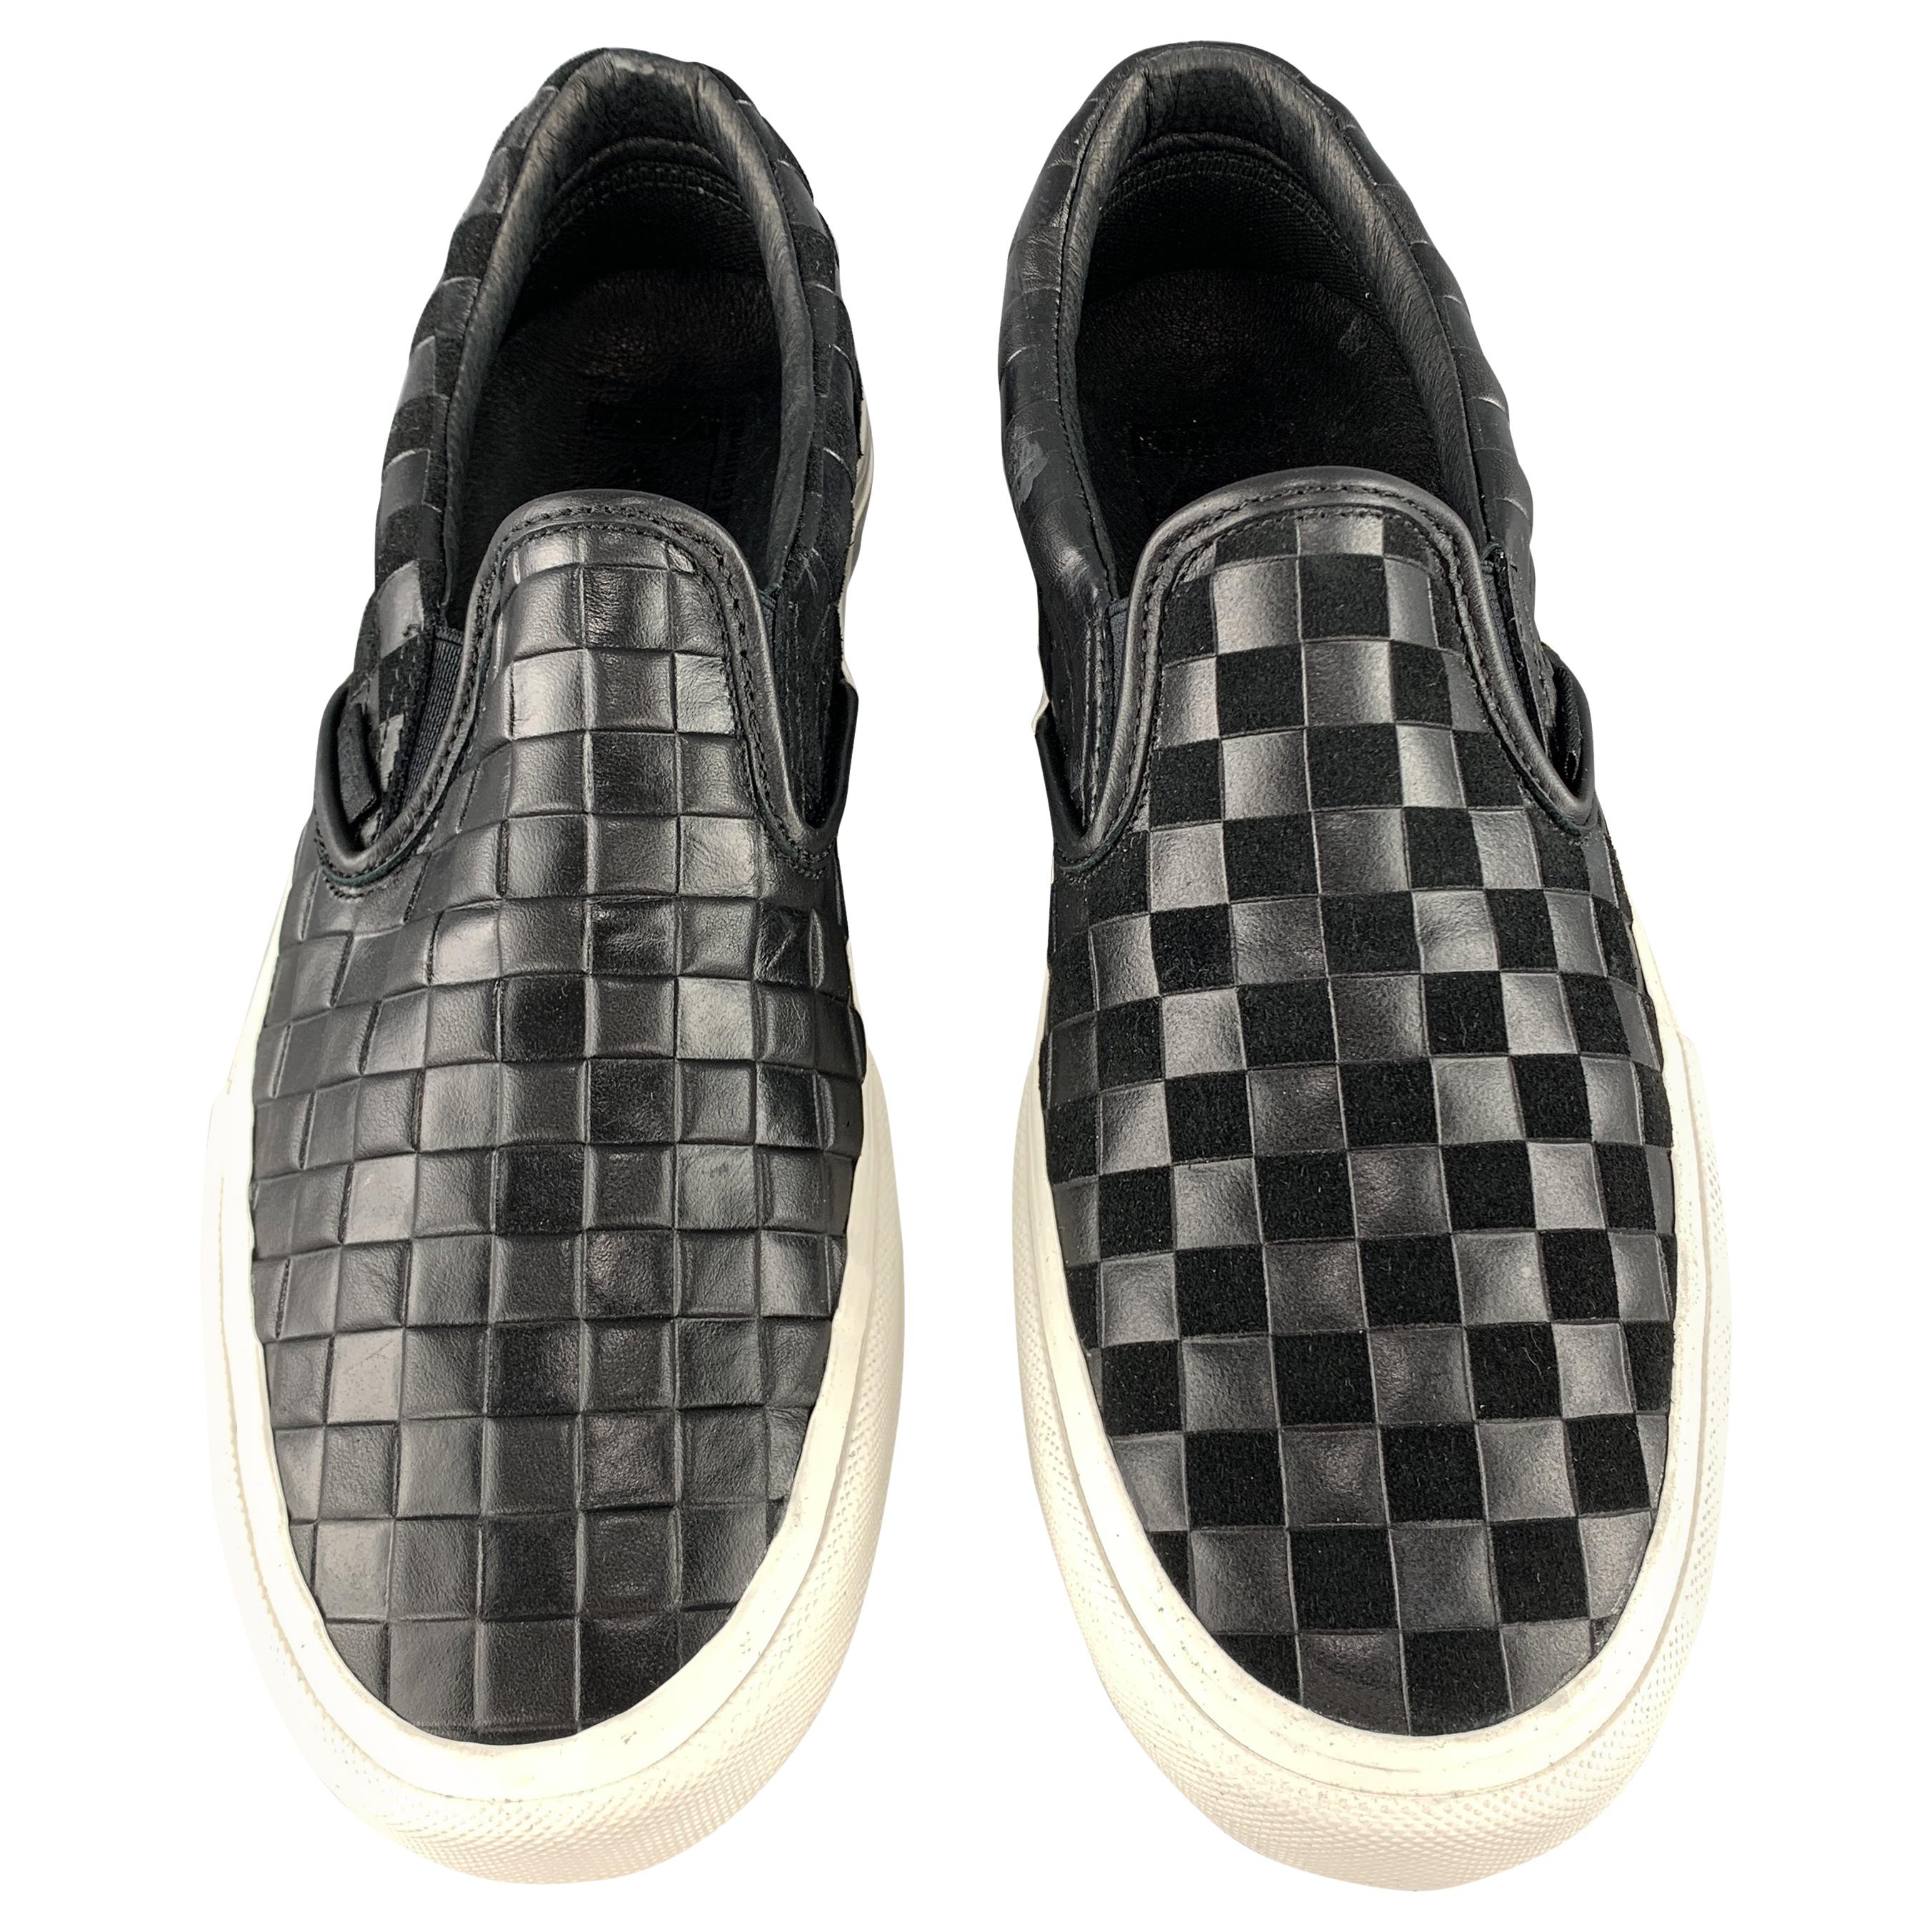 VANS x ENGINEERED GARMENTS Size 9.5 Black/White Checkered Leather Sneakers